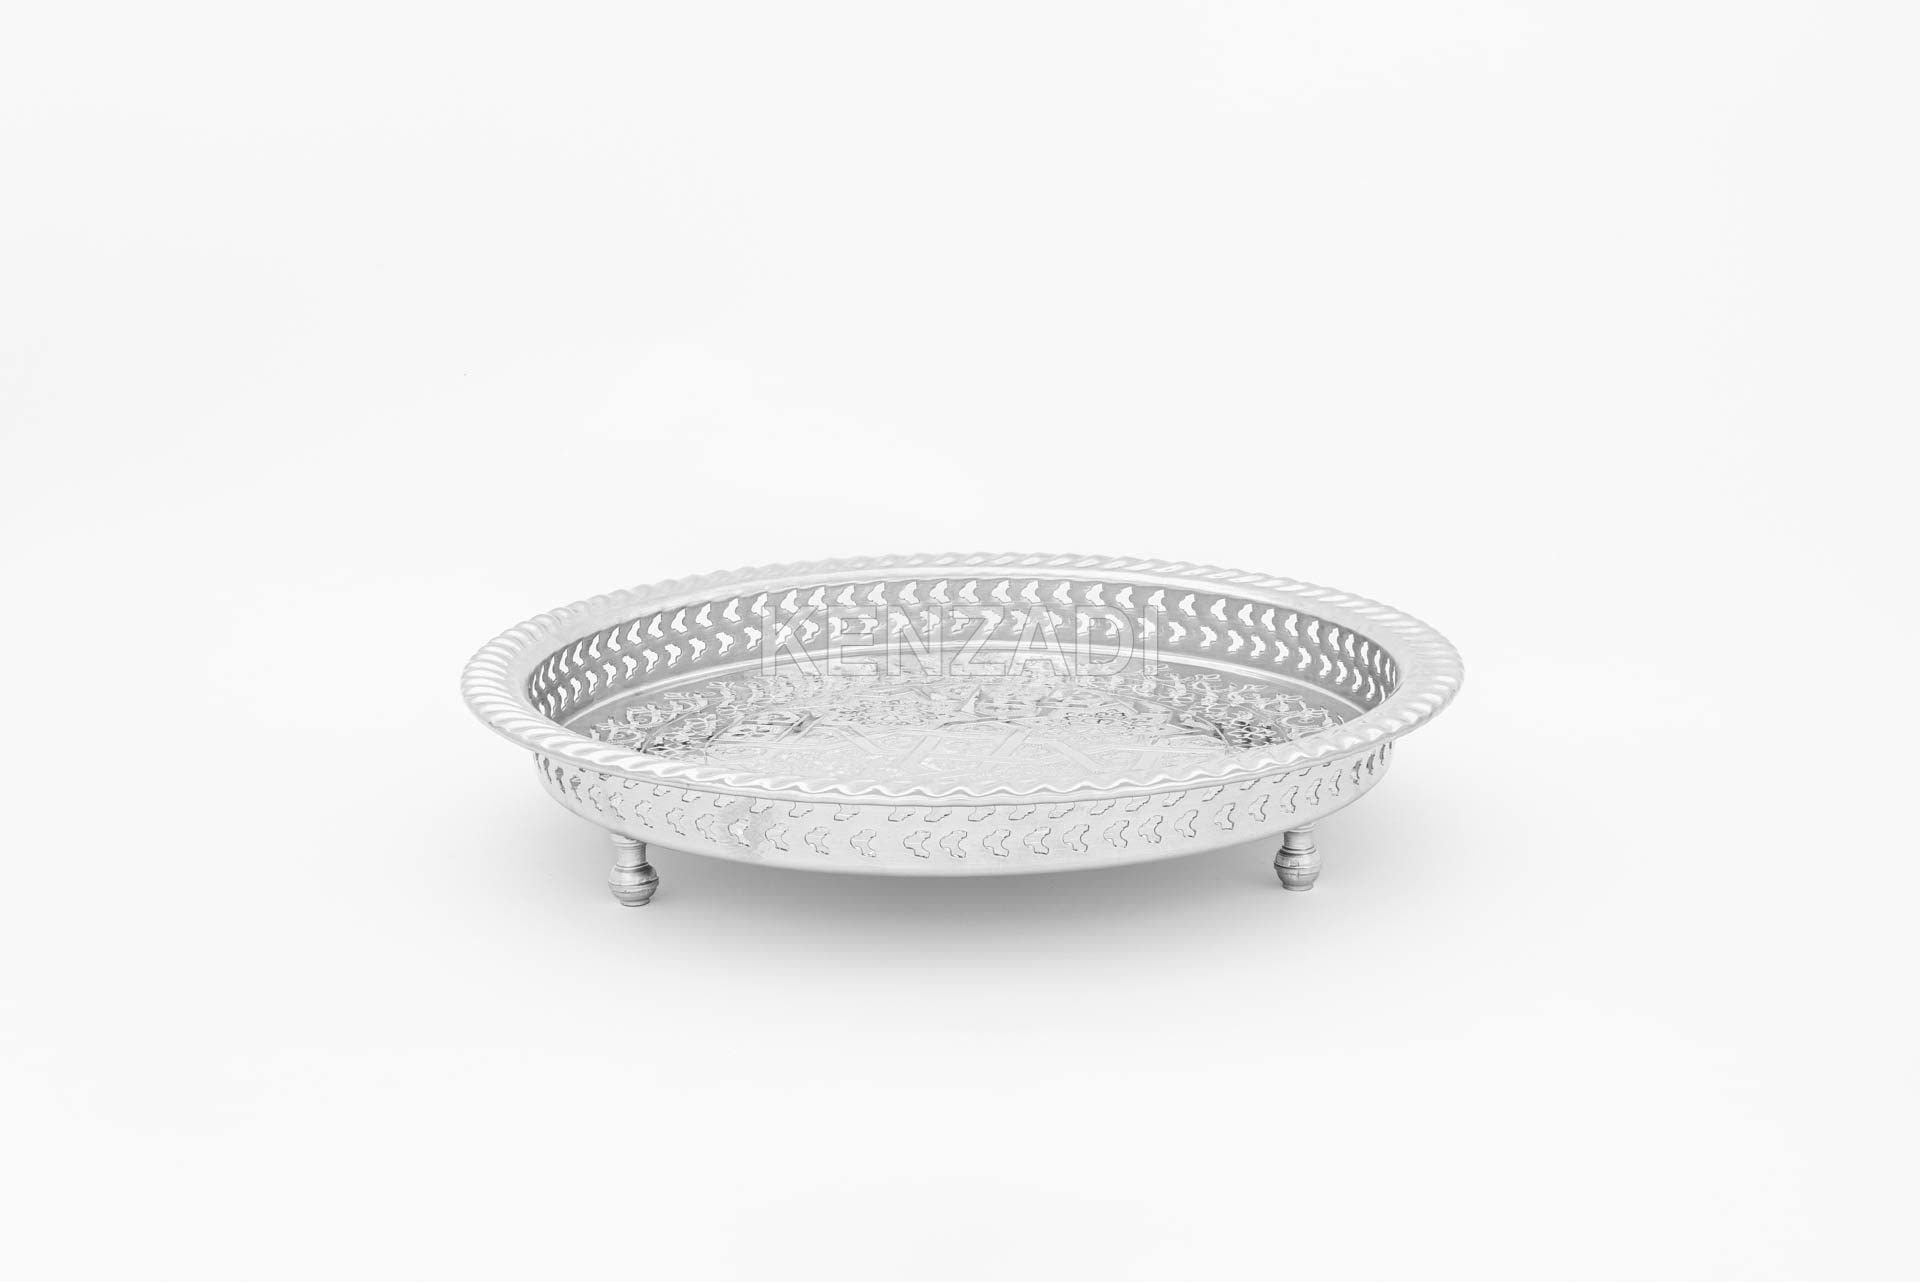 12.2 Inch Moroccan Handmade Serving Tea Tray Silver Plated Brass Handcrafted Plate in Fez Morocco - Handmade by My Poufs